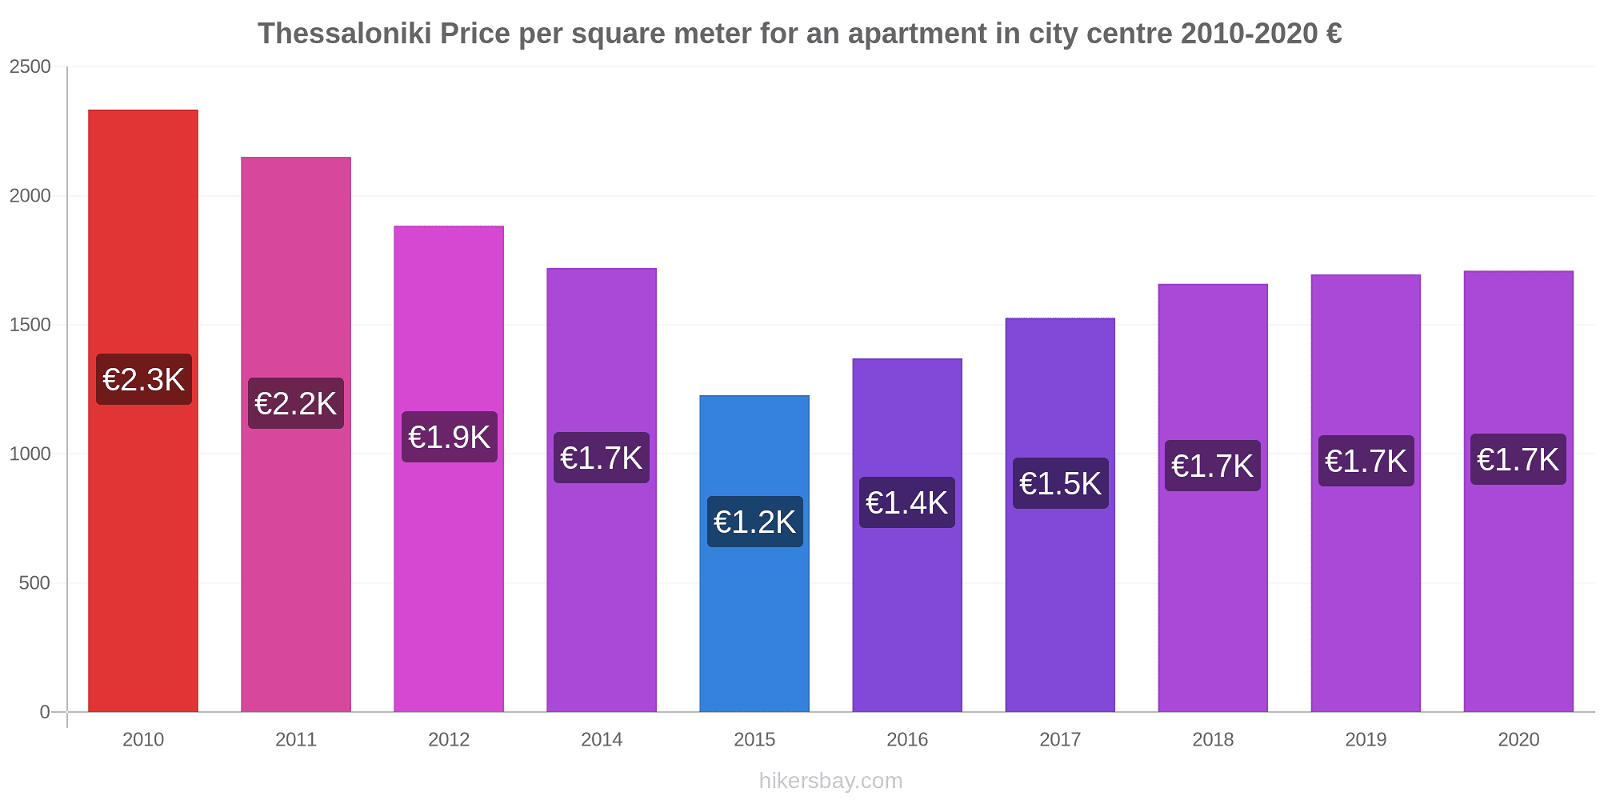 Thessaloniki price changes Price per square meter for an apartment in city centre hikersbay.com